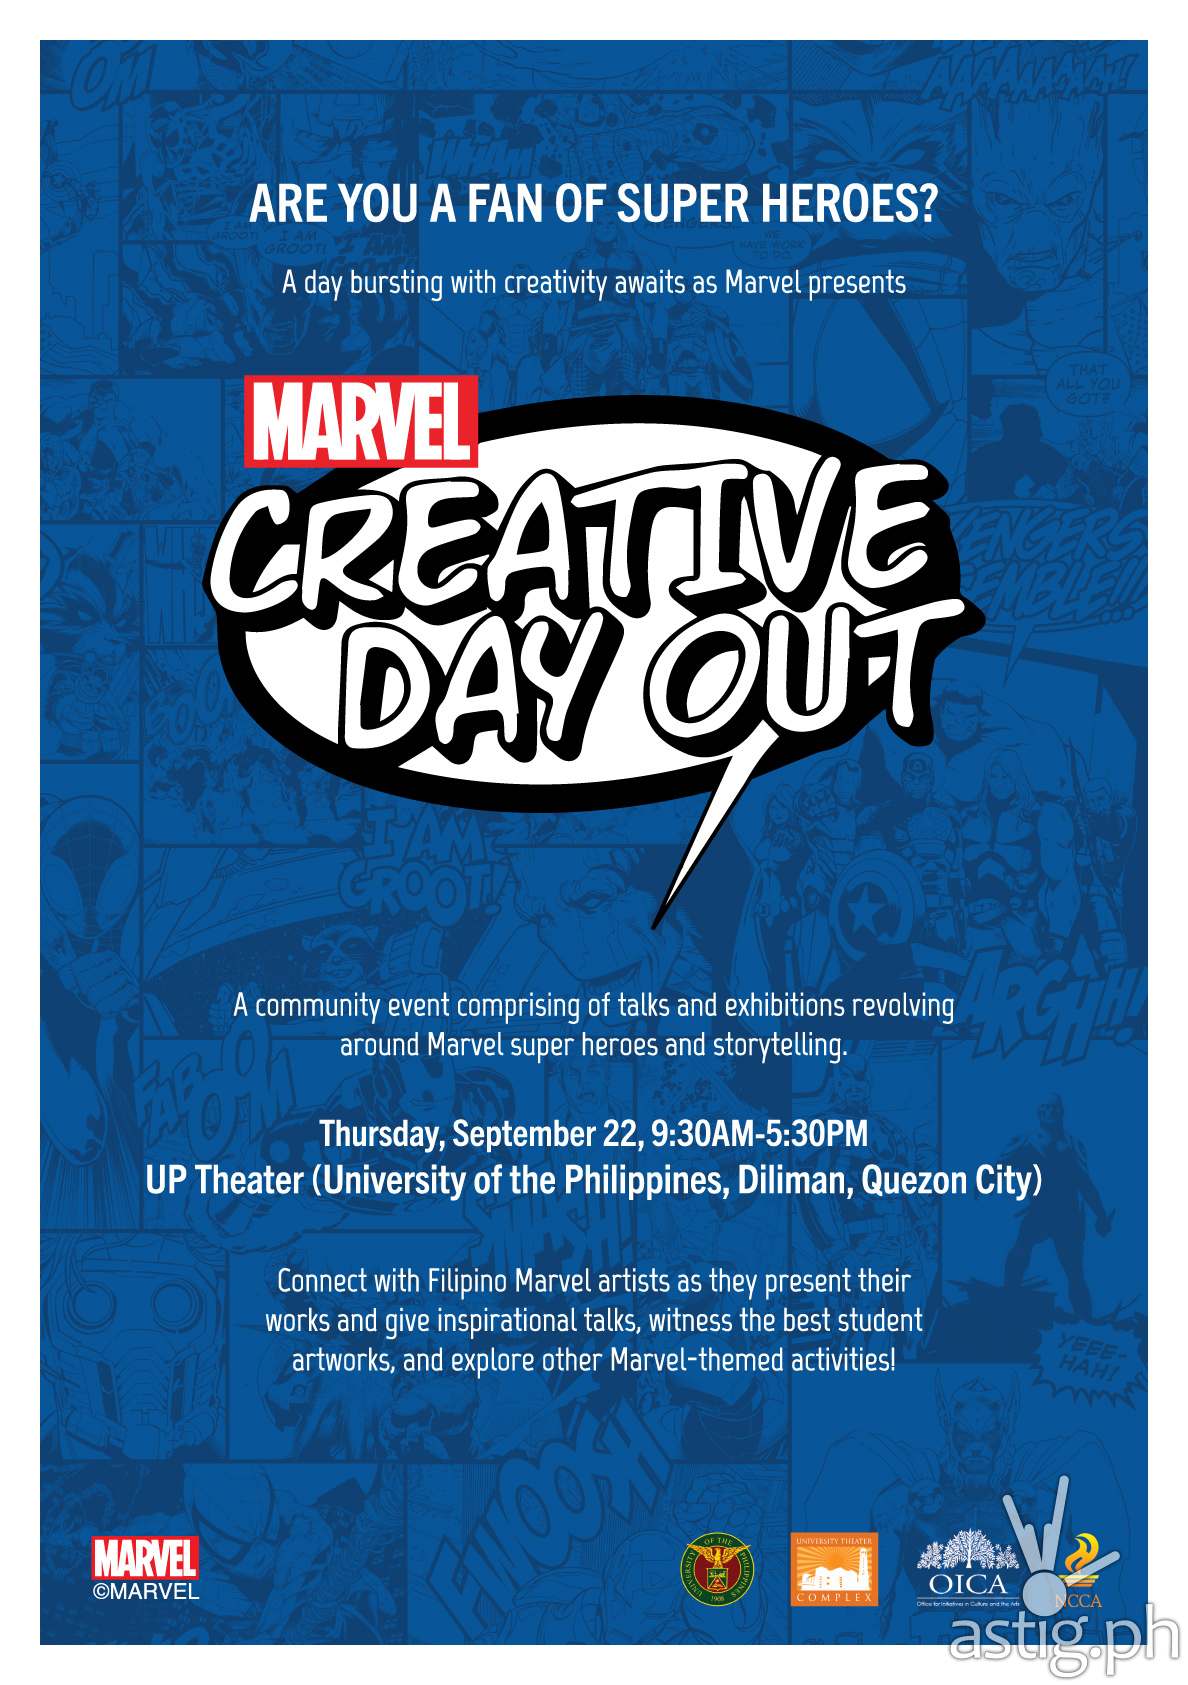 Marvel Creative Day Out.jpg